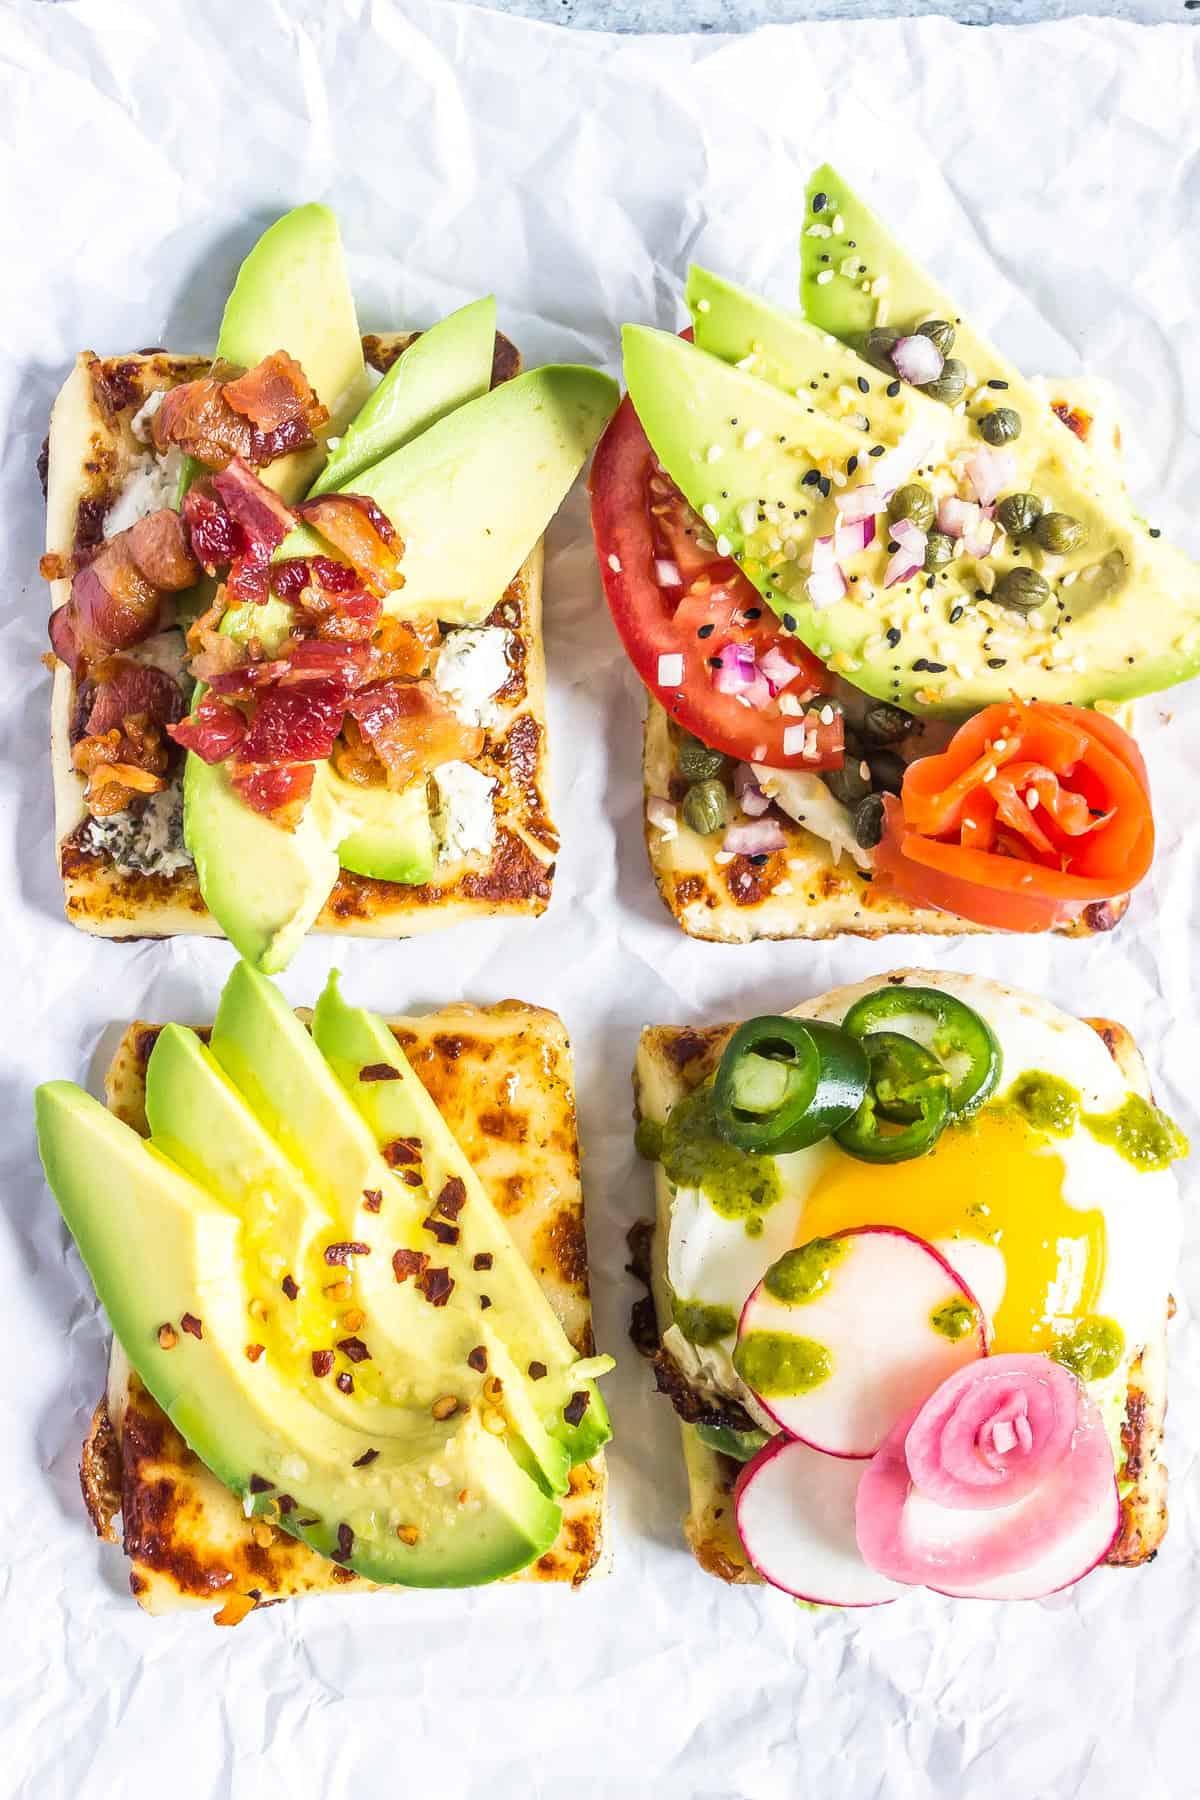 keto avocado toasts presented 4 ways: with avocado goat cheese bacon, lox, simple, and fried egg style.